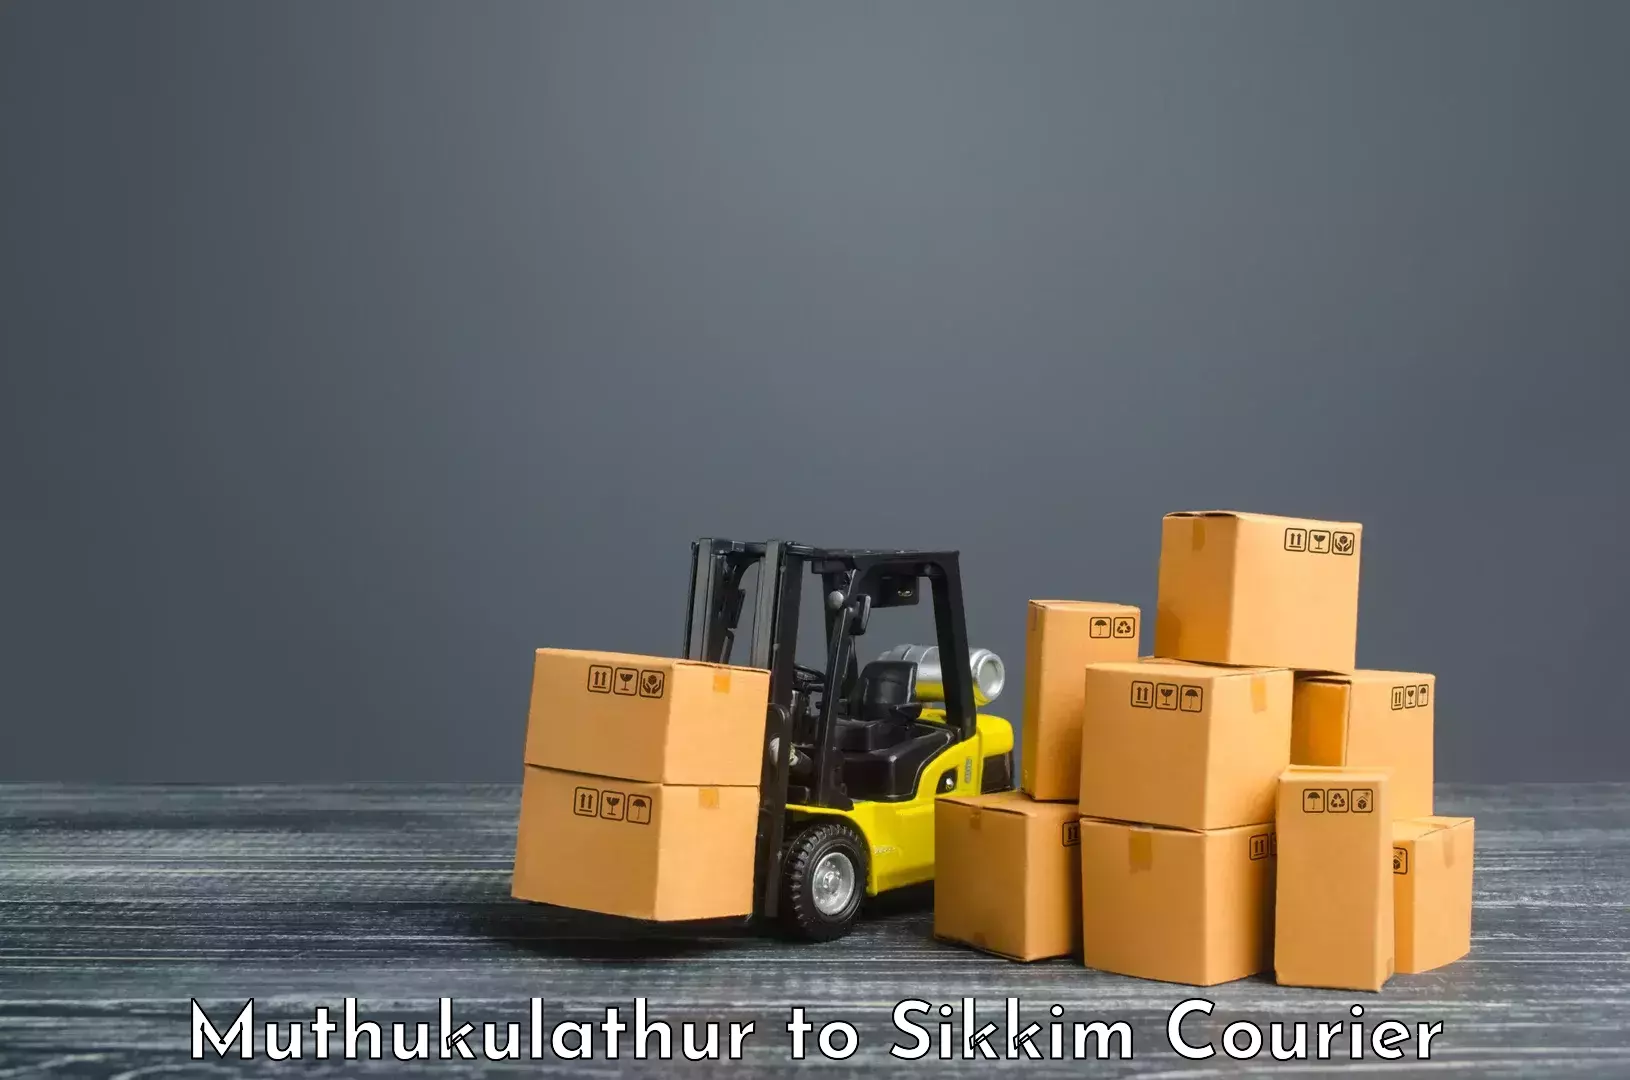 Efficient shipping platforms Muthukulathur to Pelling